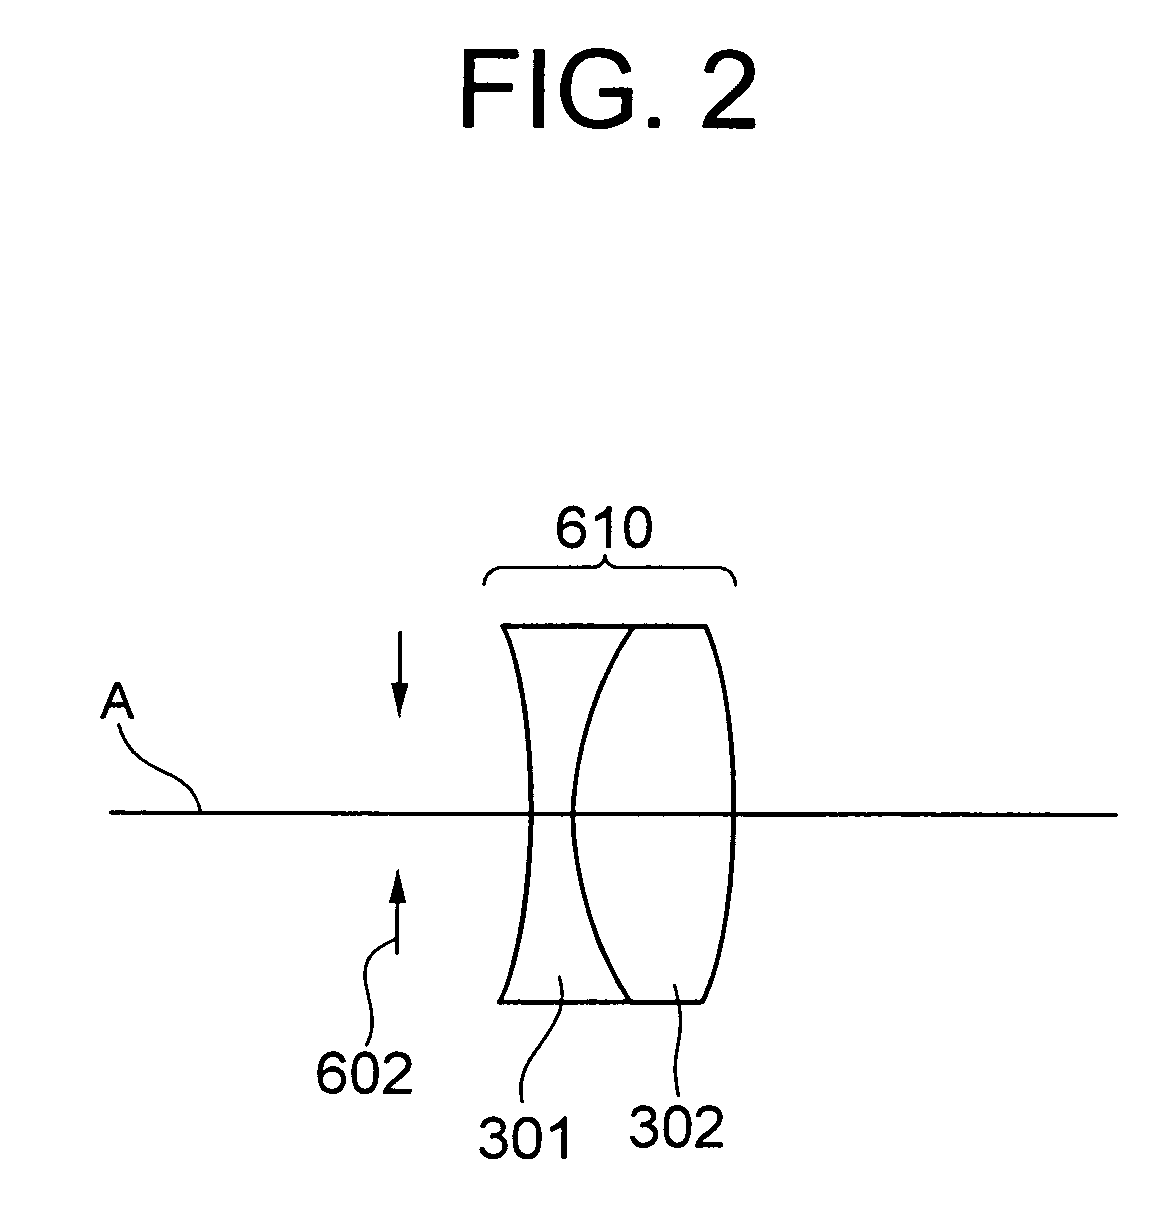 Lens system and optical apparatus